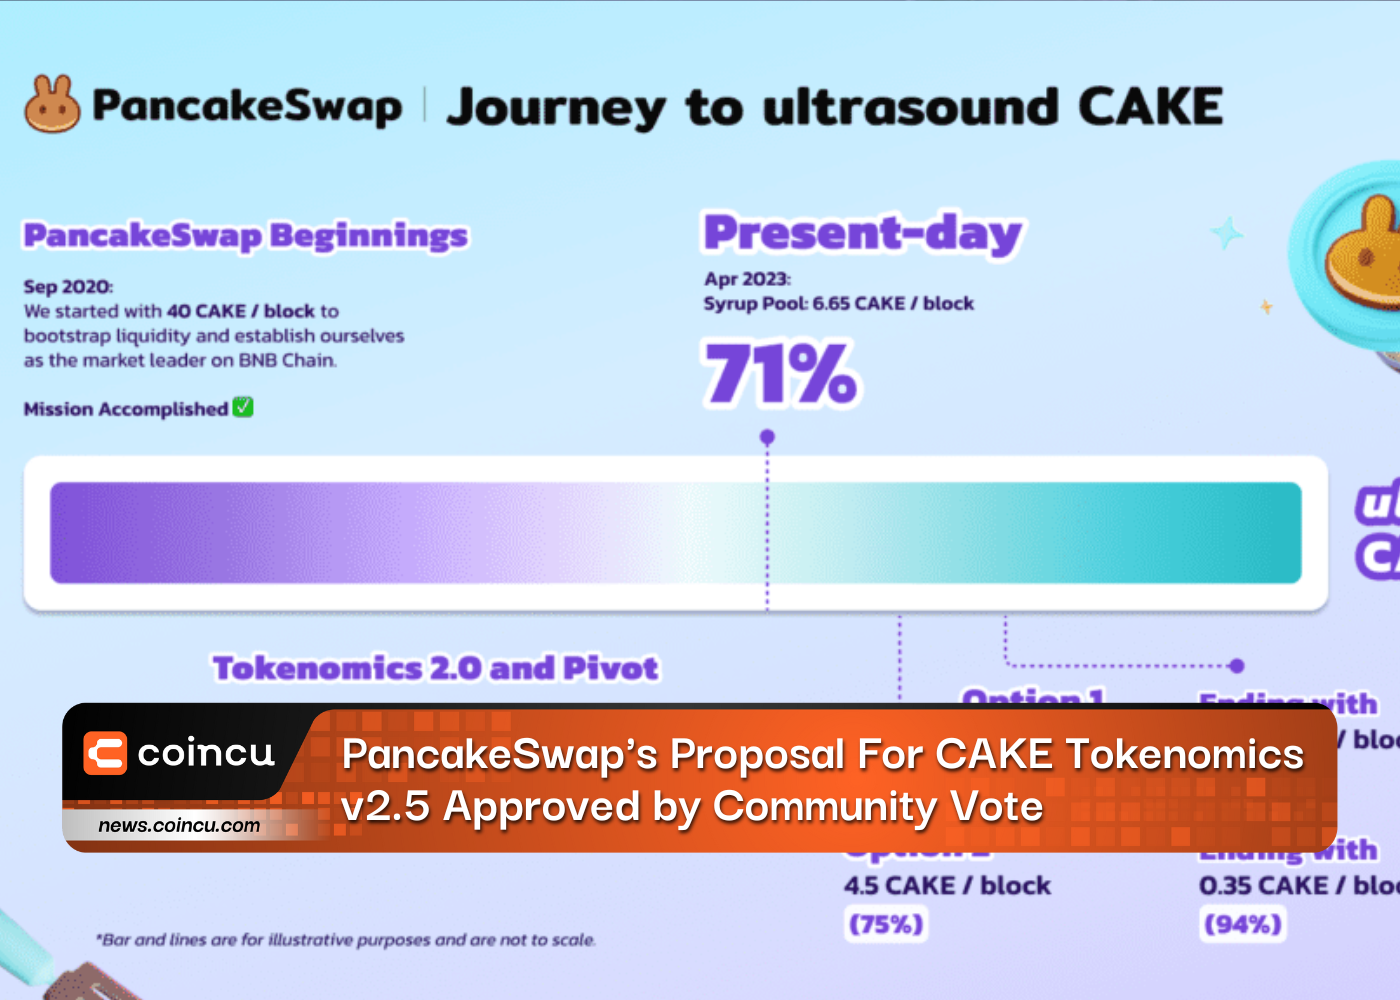 PancakeSwap's Proposal For CAKE Tokenomics v2.5 Approved by Community Vote